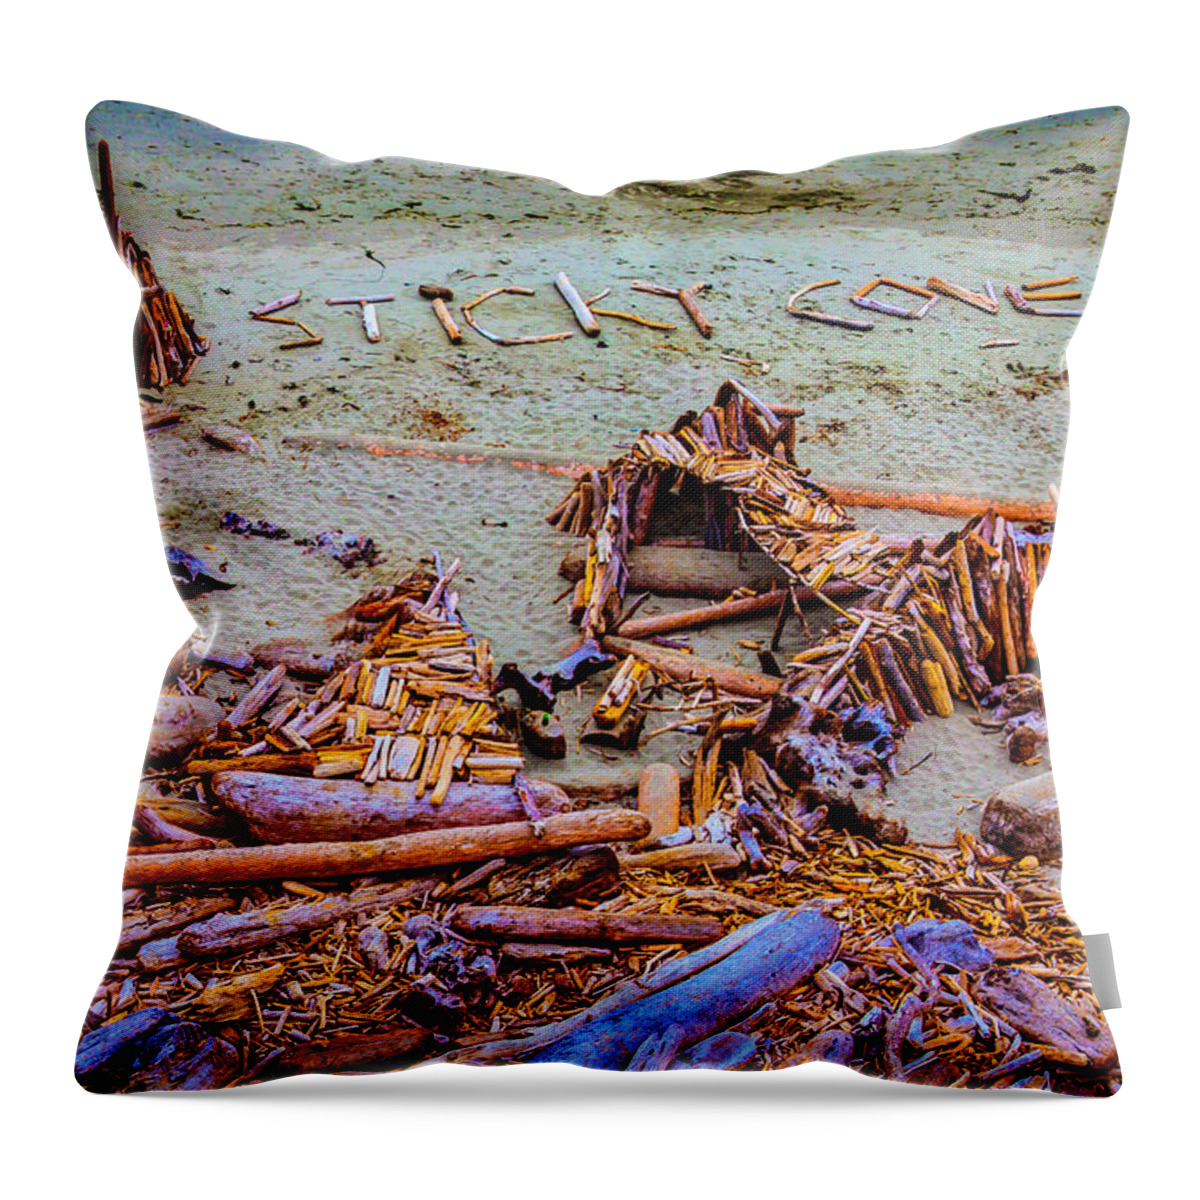 Sticky Cove Mendocino Throw Pillow featuring the photograph Sticky Cove Mendocino by Garry Gay